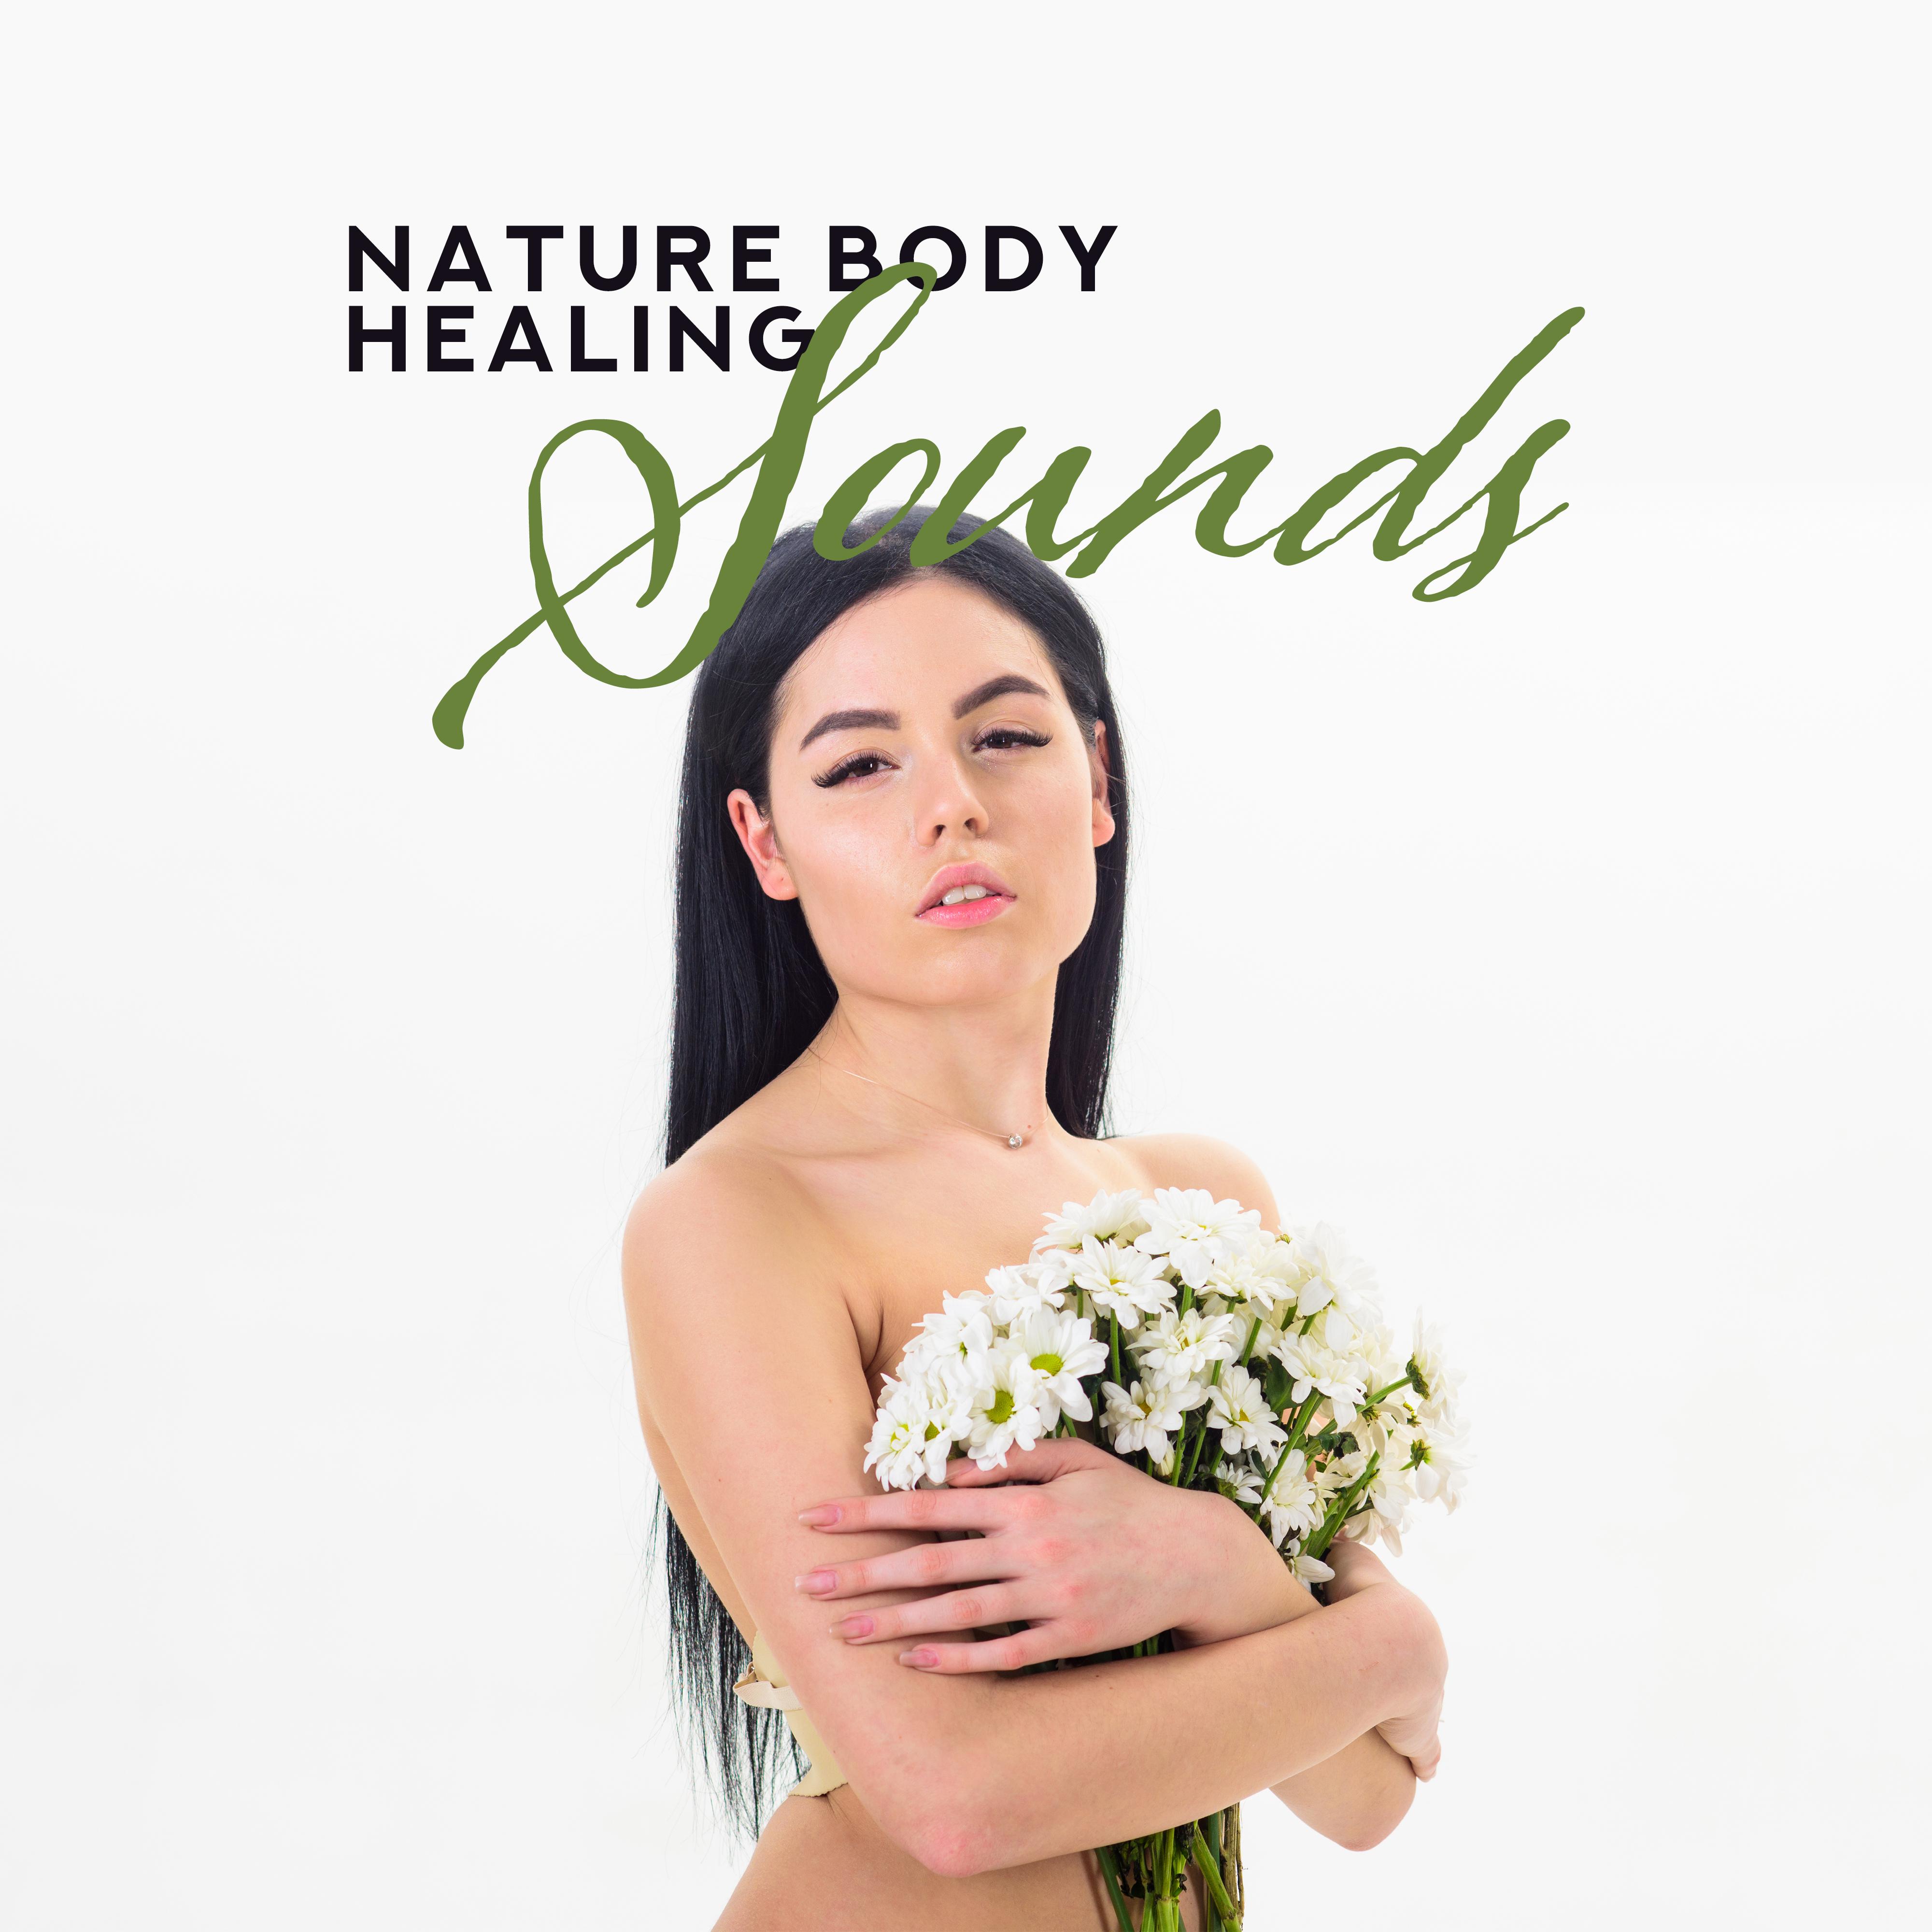 Nature Body Healing Sounds: 2019 New Age Nature Music Perfect for Spa & Wellness, Massage, Deep Relaxation at Home, Soothing Sounds of Birds, Forest, Water, Calming Piano & Guitar Melodies